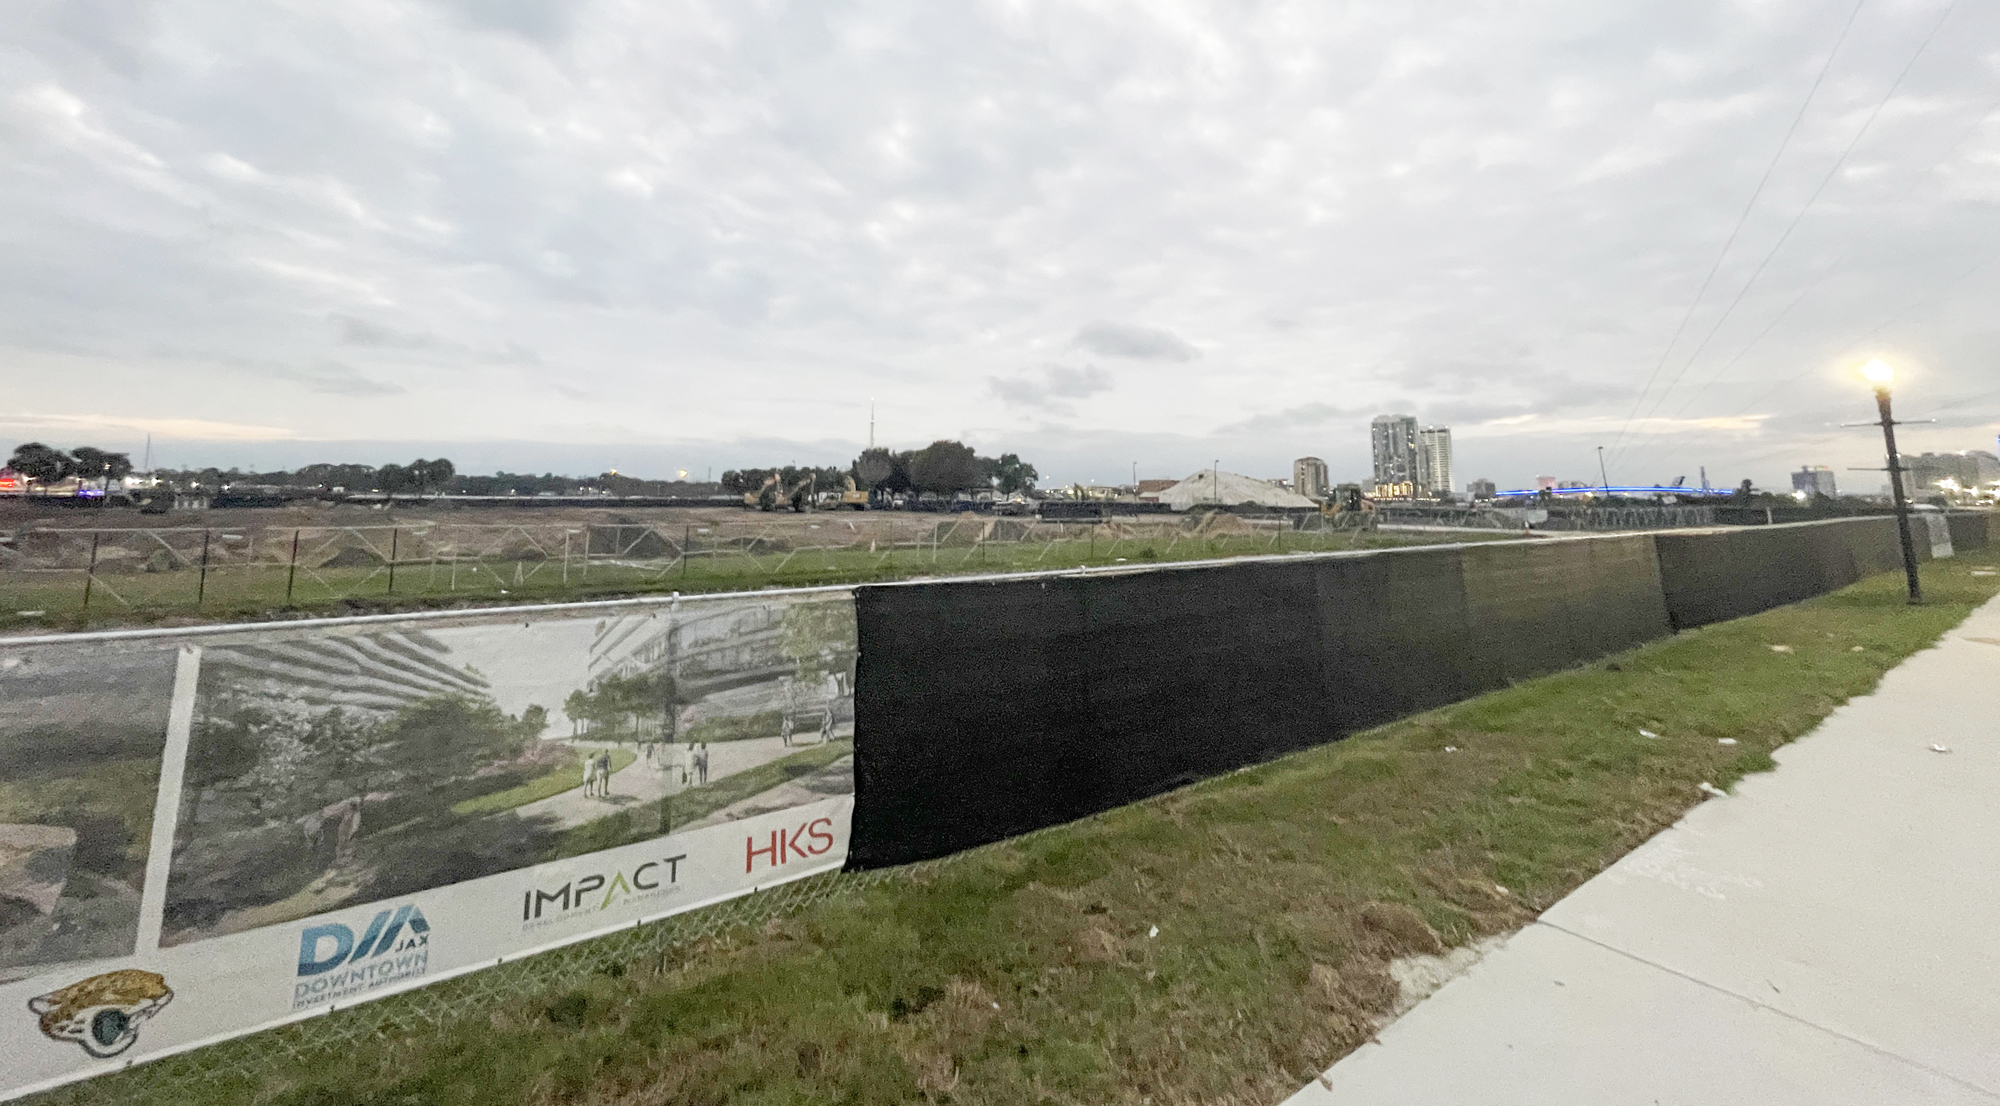 The Four Seasons site is surrounded by a construction barrier and horizonal work has begun. Renderings on the fencing show what is planned for the property.